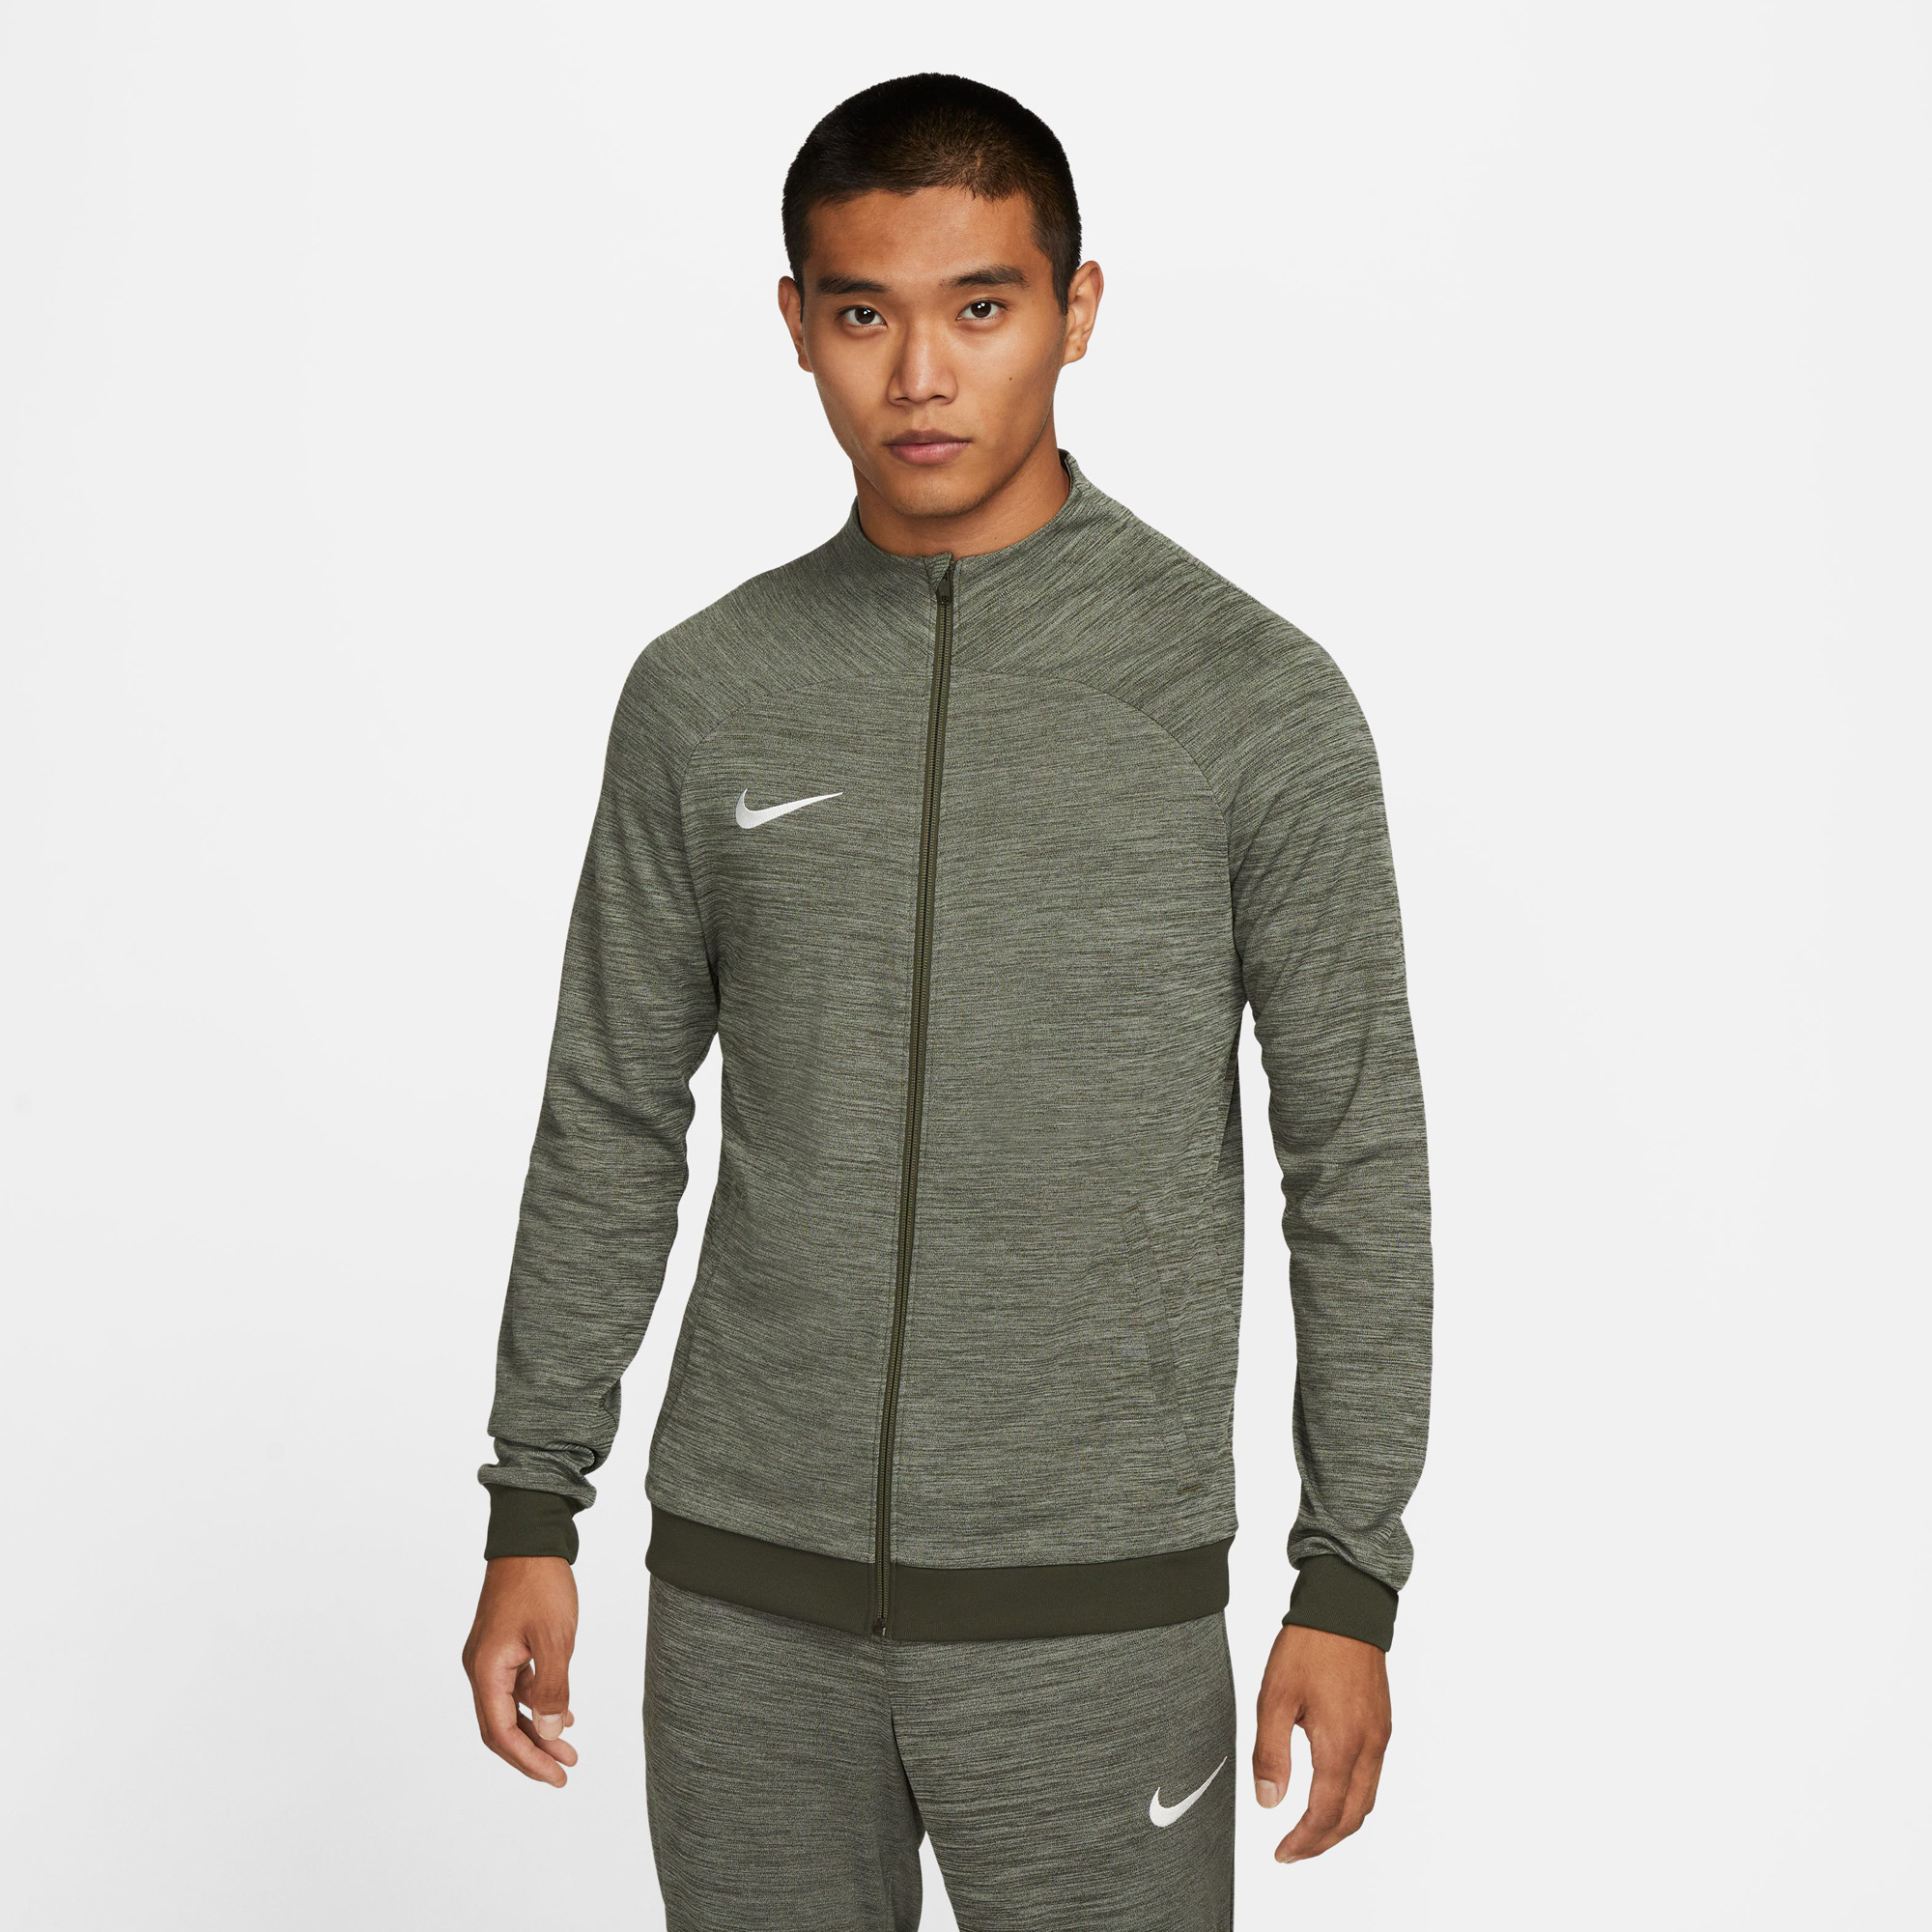 Chandal nike academy hombre | Intersport